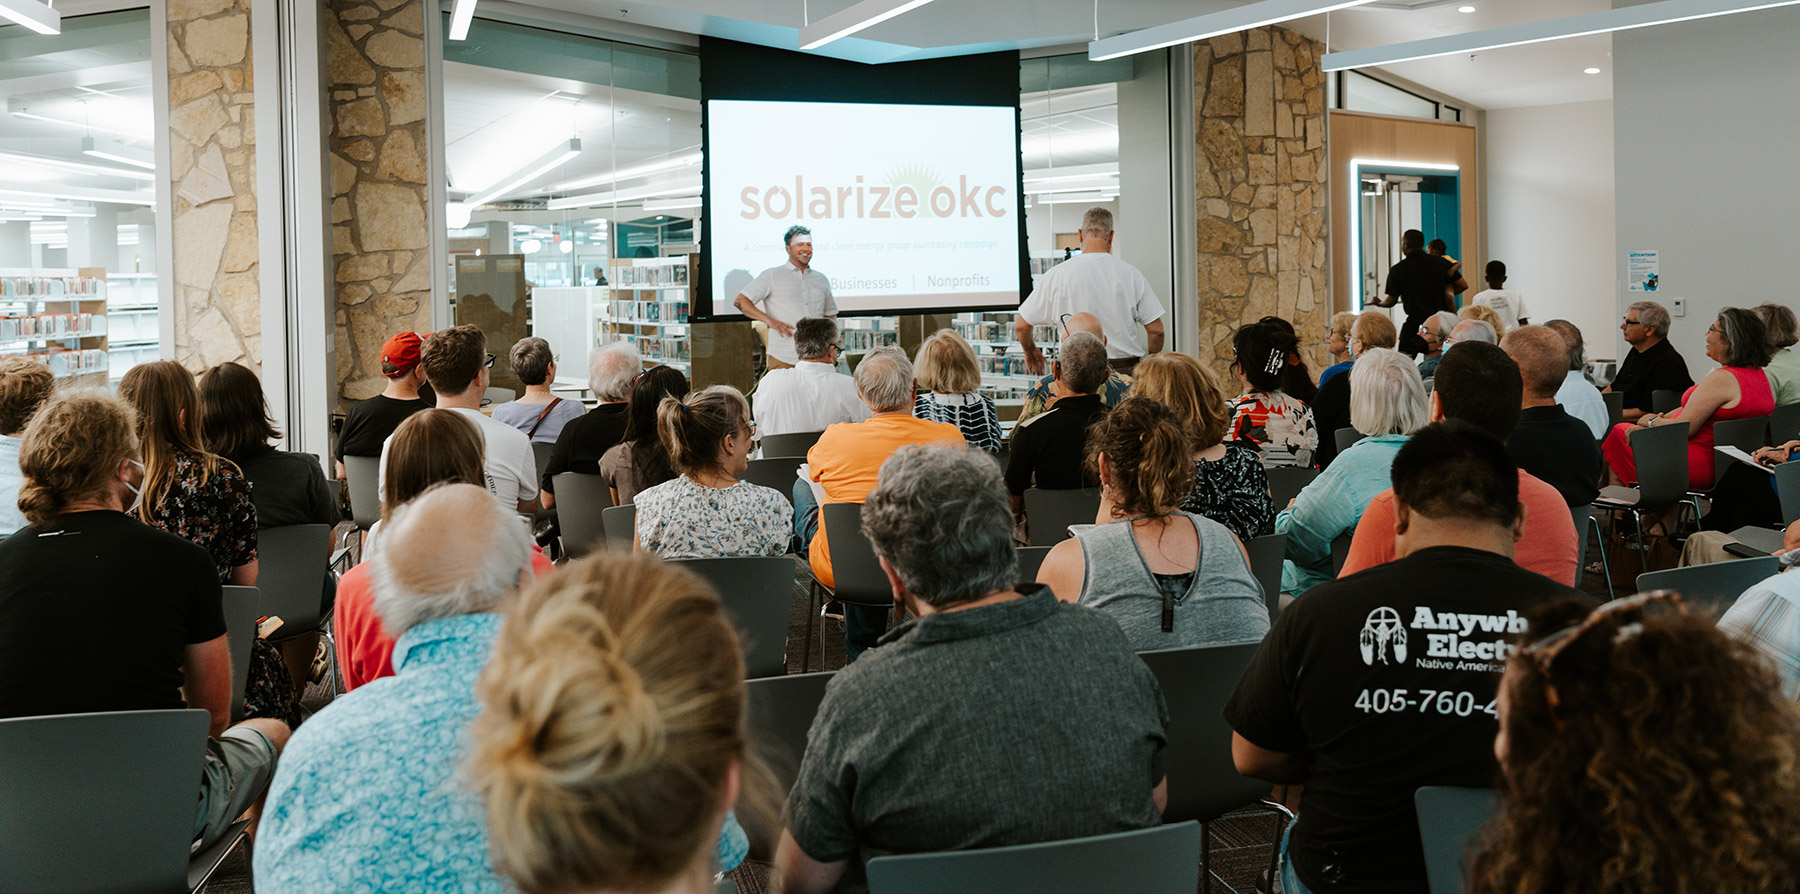 Oklahoma City residents attend the launch event for the 2022 Solarize OKC campaign. Photo courtesy of EightTwenty Solar